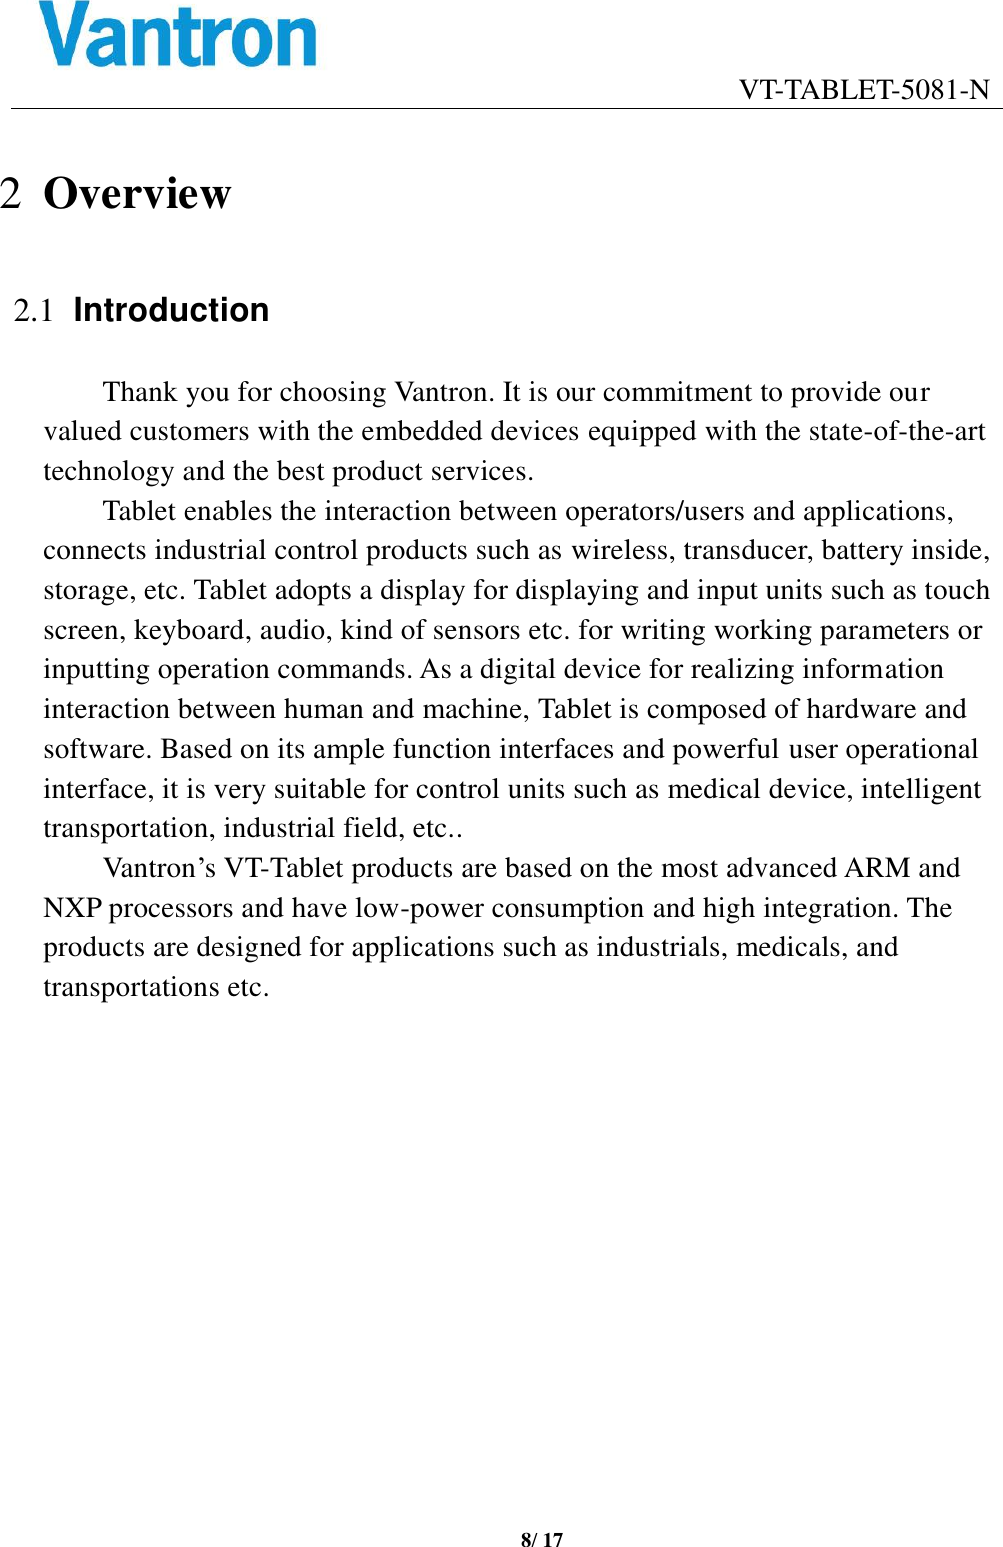                                    VT-TABLET-5081-N 8/ 17  2 Overview 2.1 Introduction Thank you for choosing Vantron. It is our commitment to provide our valued customers with the embedded devices equipped with the state-of-the-art technology and the best product services.   Tablet enables the interaction between operators/users and applications, connects industrial control products such as wireless, transducer, battery inside, storage, etc. Tablet adopts a display for displaying and input units such as touch screen, keyboard, audio, kind of sensors etc. for writing working parameters or inputting operation commands. As a digital device for realizing information interaction between human and machine, Tablet is composed of hardware and software. Based on its ample function interfaces and powerful user operational interface, it is very suitable for control units such as medical device, intelligent transportation, industrial field, etc.. Vantron’s VT-Tablet products are based on the most advanced ARM and NXP processors and have low-power consumption and high integration. The products are designed for applications such as industrials, medicals, and transportations etc.  